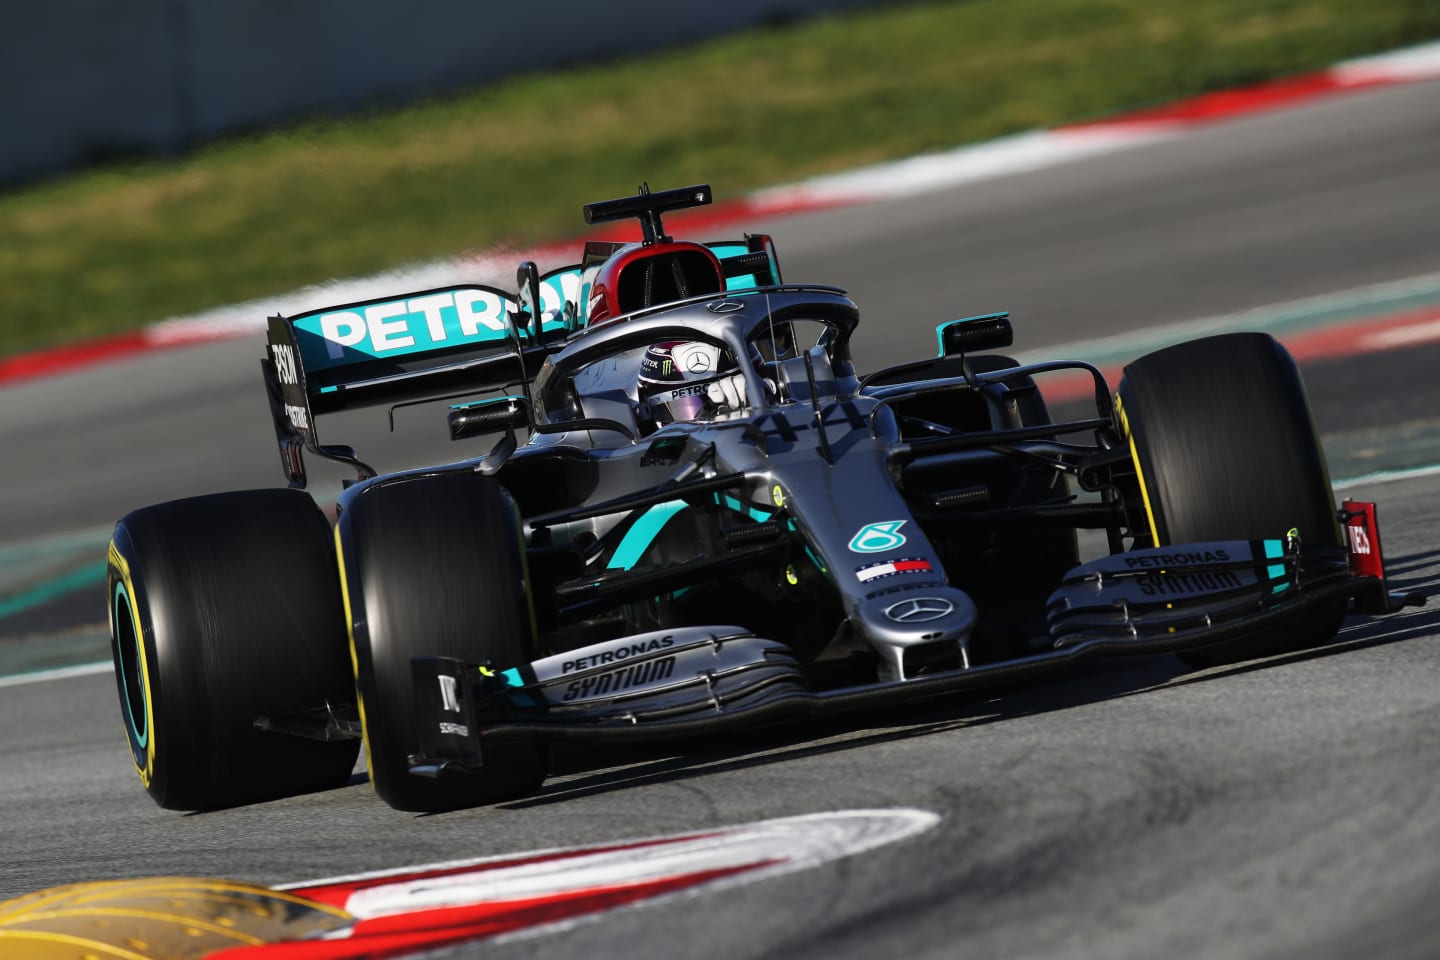 BARCELONA, SPAIN - FEBRUARY 28: Lewis Hamilton of Great Britain driving the (44) Mercedes AMG